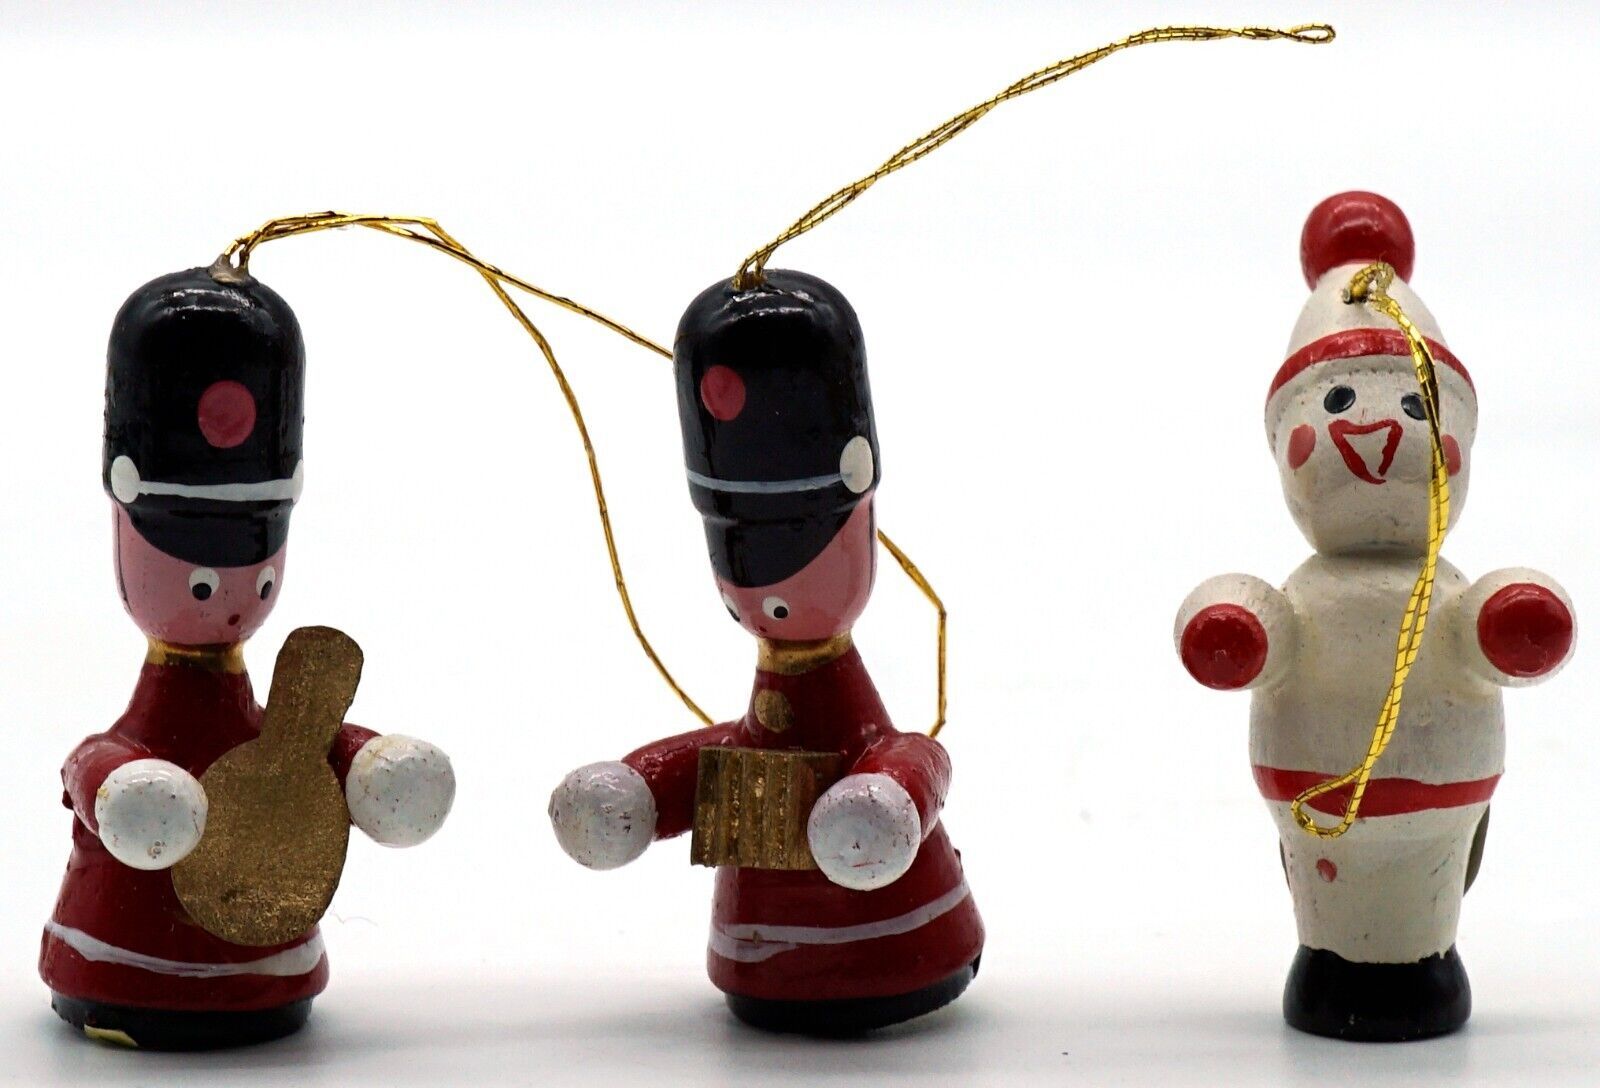 Wooden Christmas Ornaments Erzgebirge Style 2 Toy Soldiers & a Snowman - $13.33